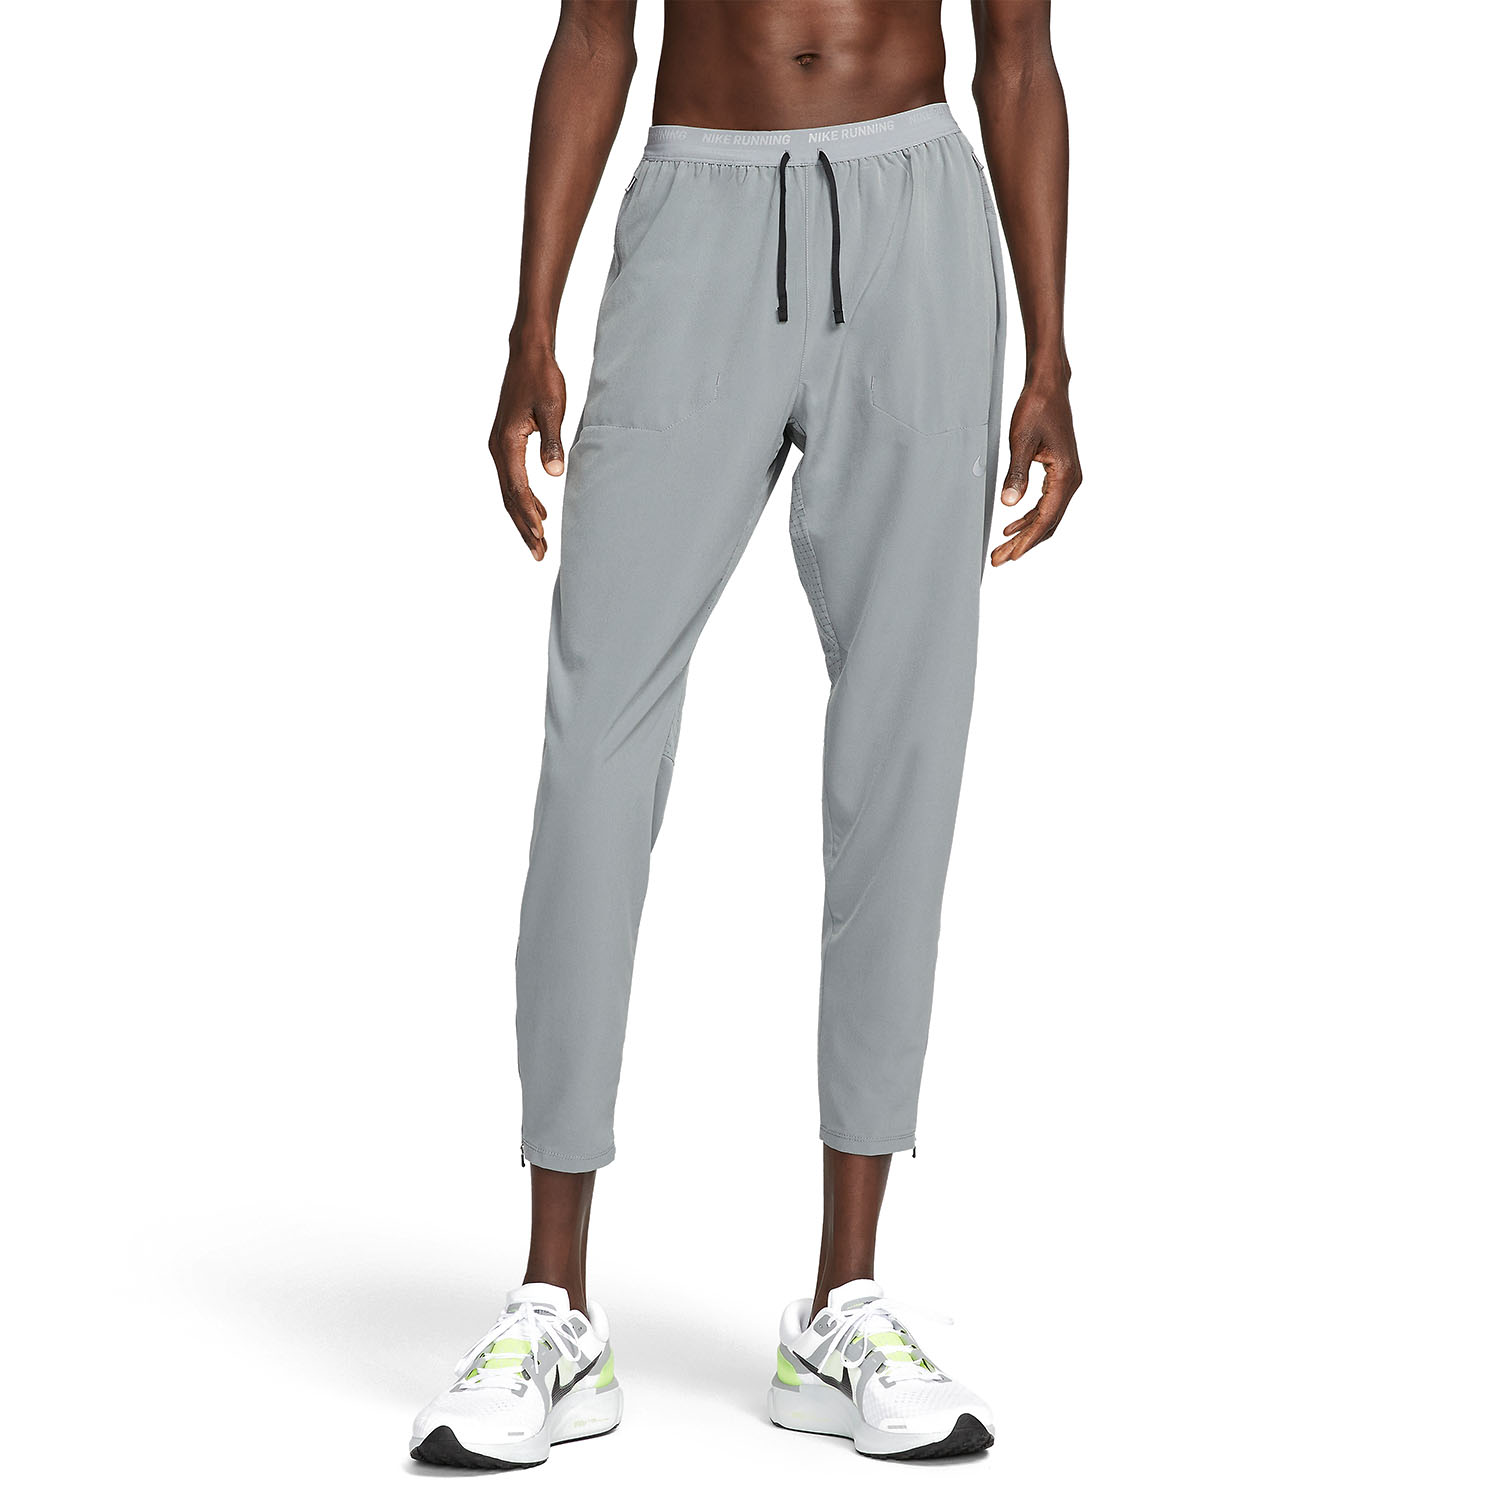 The Best Track Pants for Men: Adidas, Nike, Wales Bonner, and More | GQ